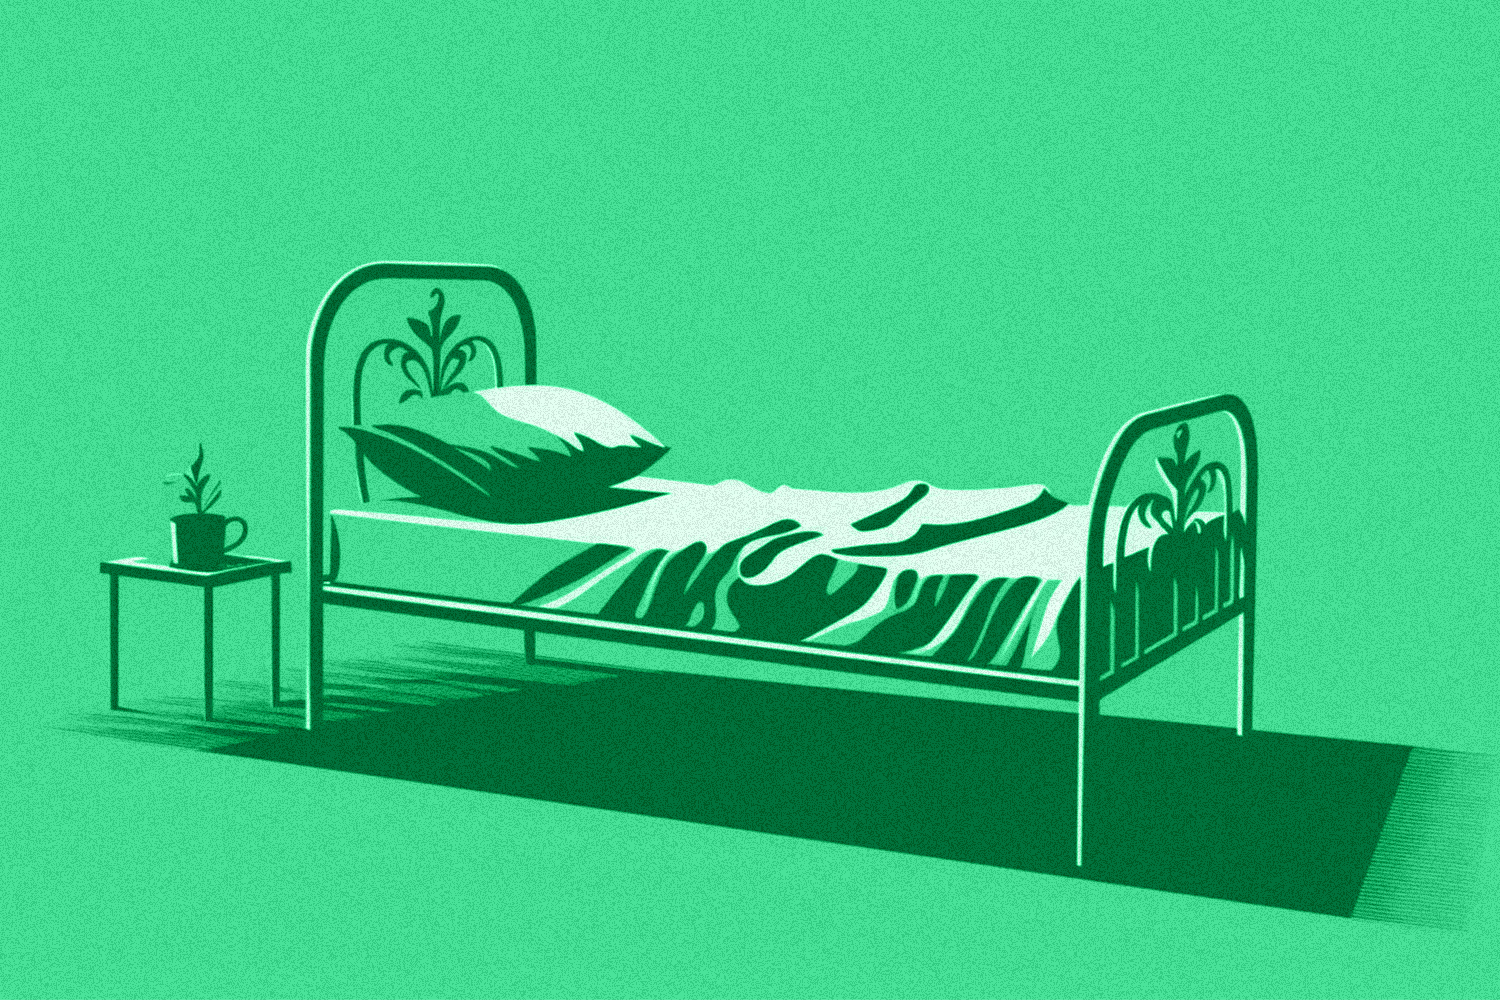 A psychiatric bed next to a bedside table with a plant on it isolated on a green background